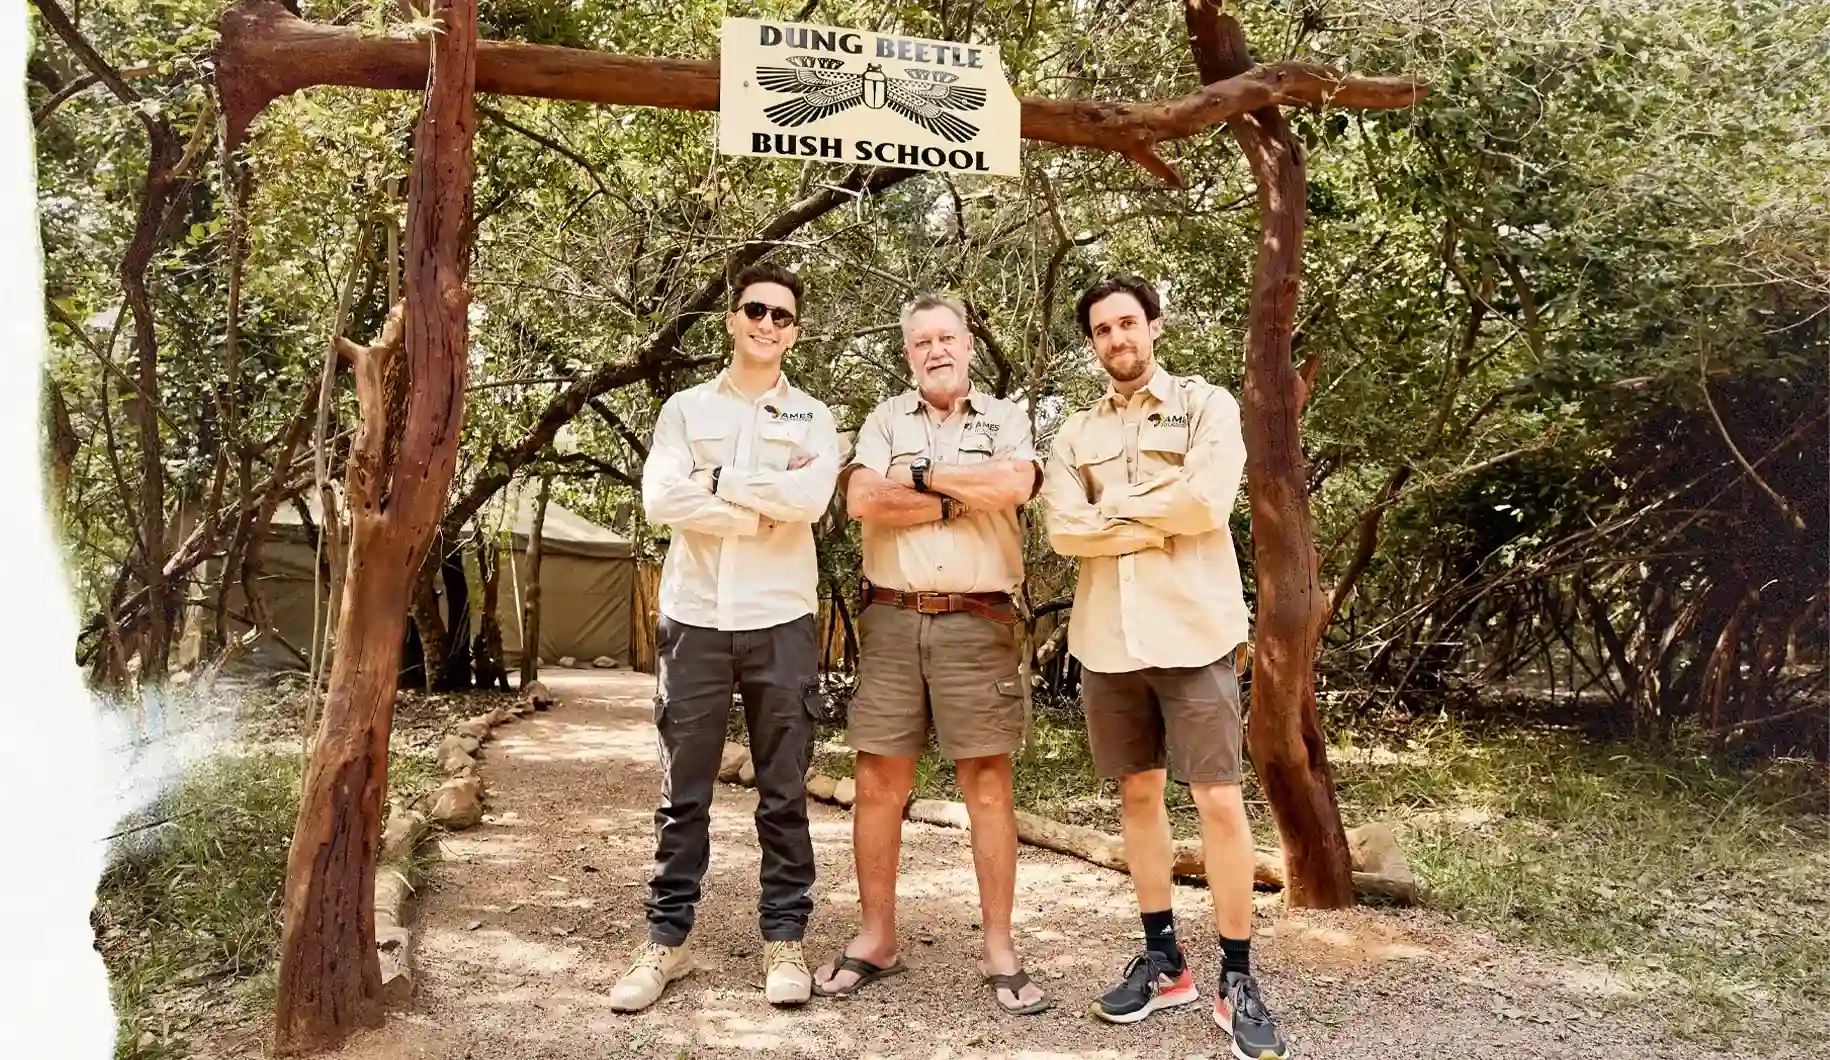 Group image of AMES founder Marlon Braumann, co-founder Christoph Rösler and SA coordinator Les Brett, standing infront of the gates to the Dung Beetle Bush School.